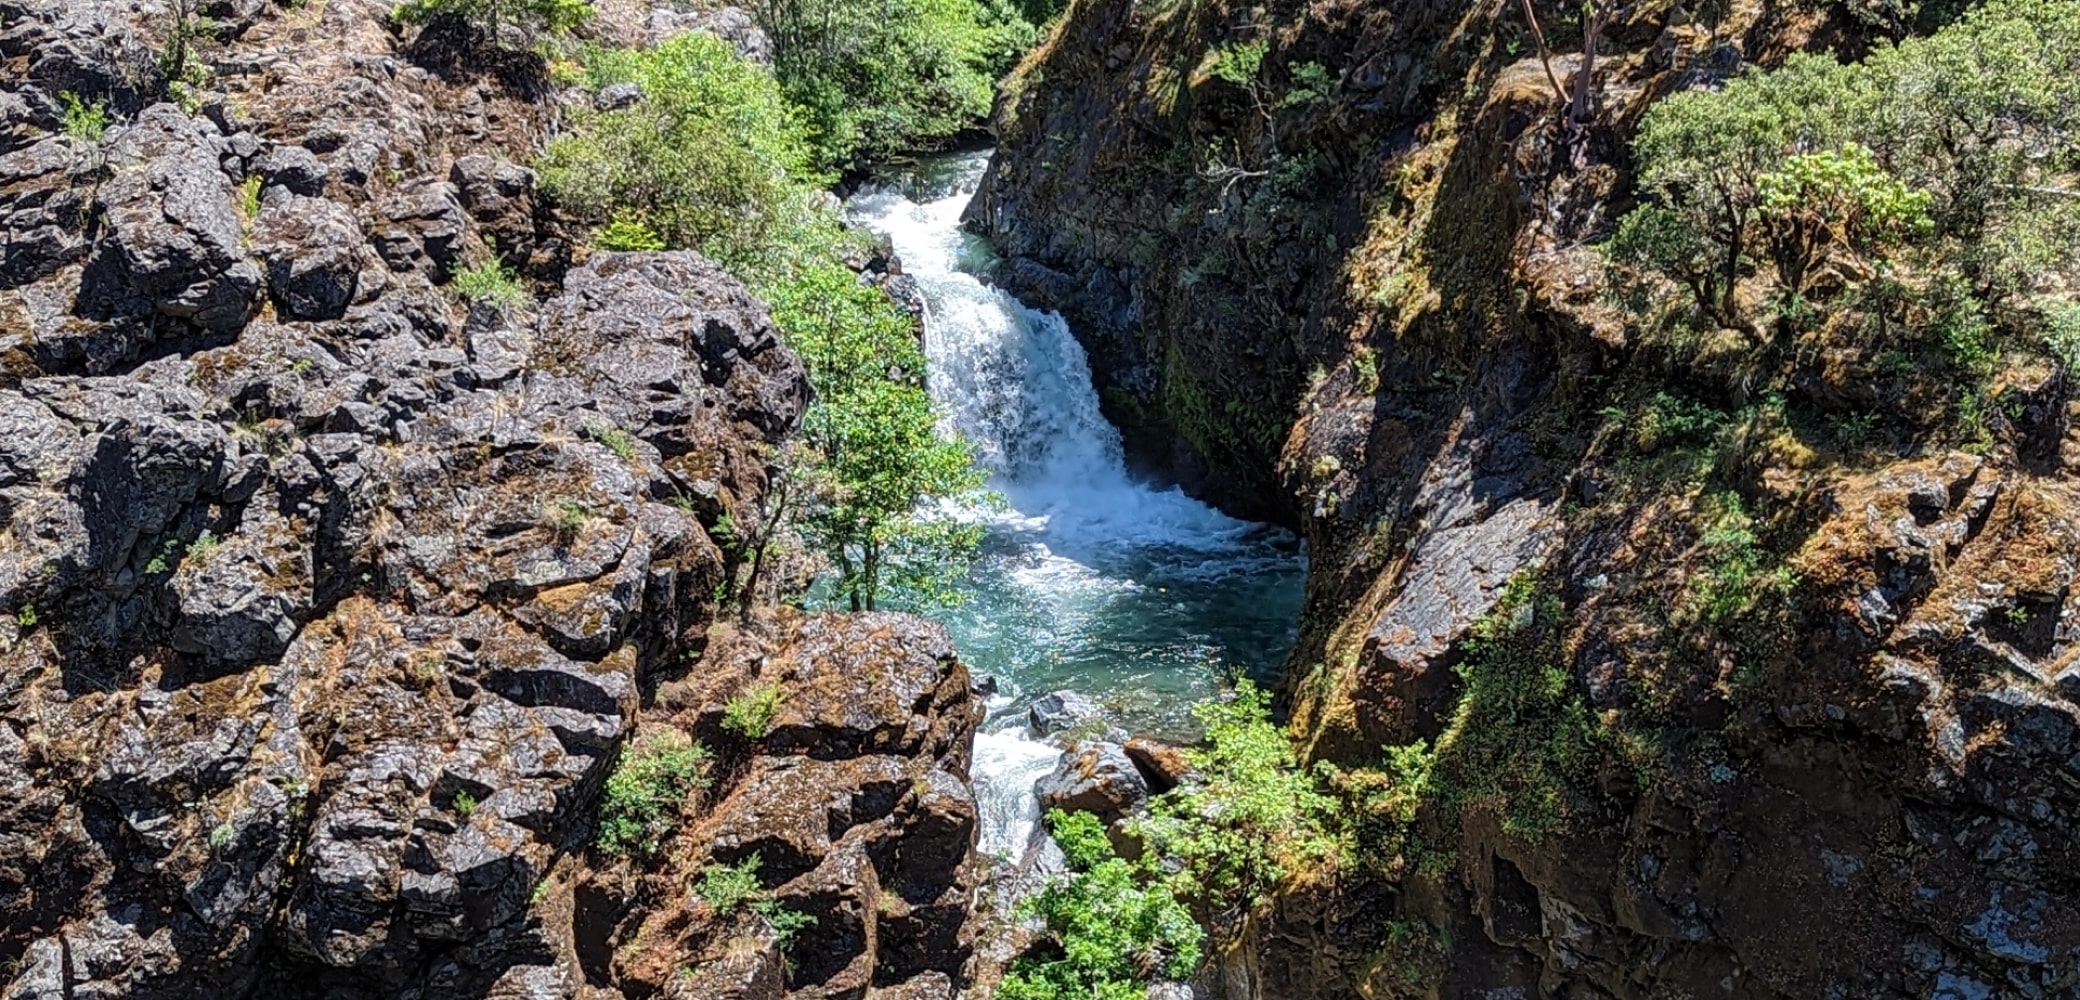 A waterfall on the Rogue River in Oregon between canyon rocks.